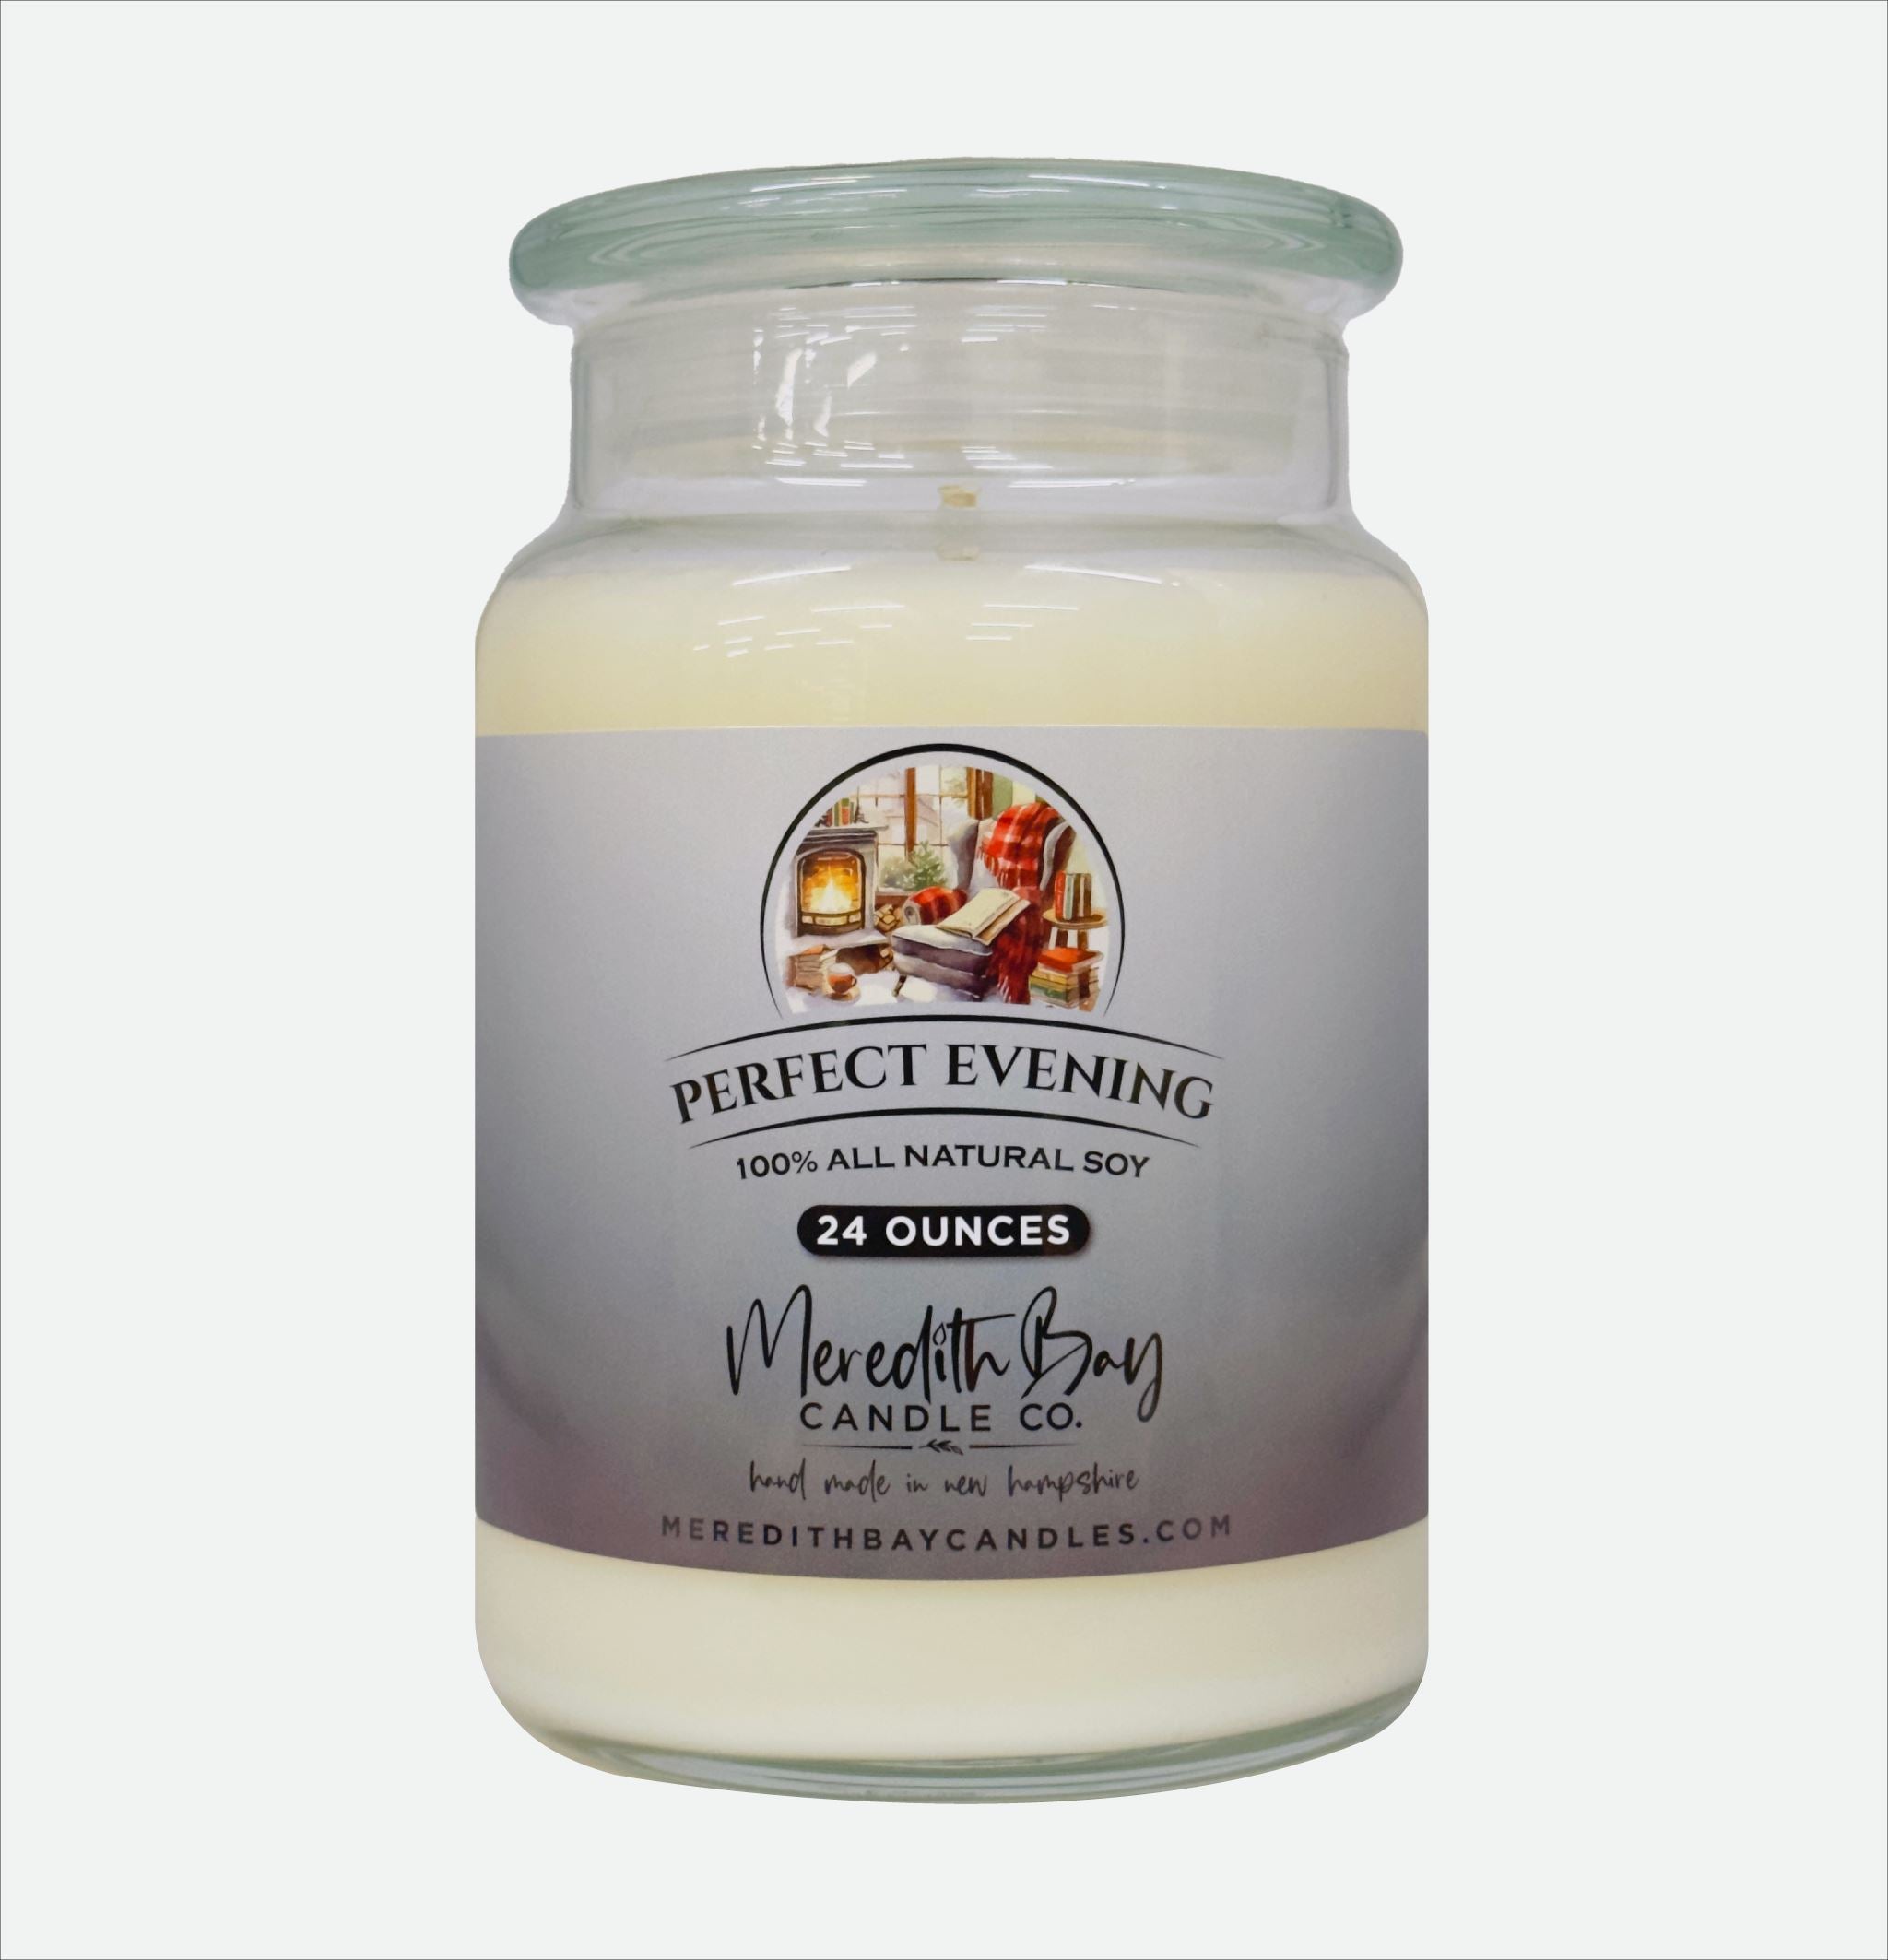 Perfect Evening Soy Candle Meredith Bay Candle Co 24 Oz 